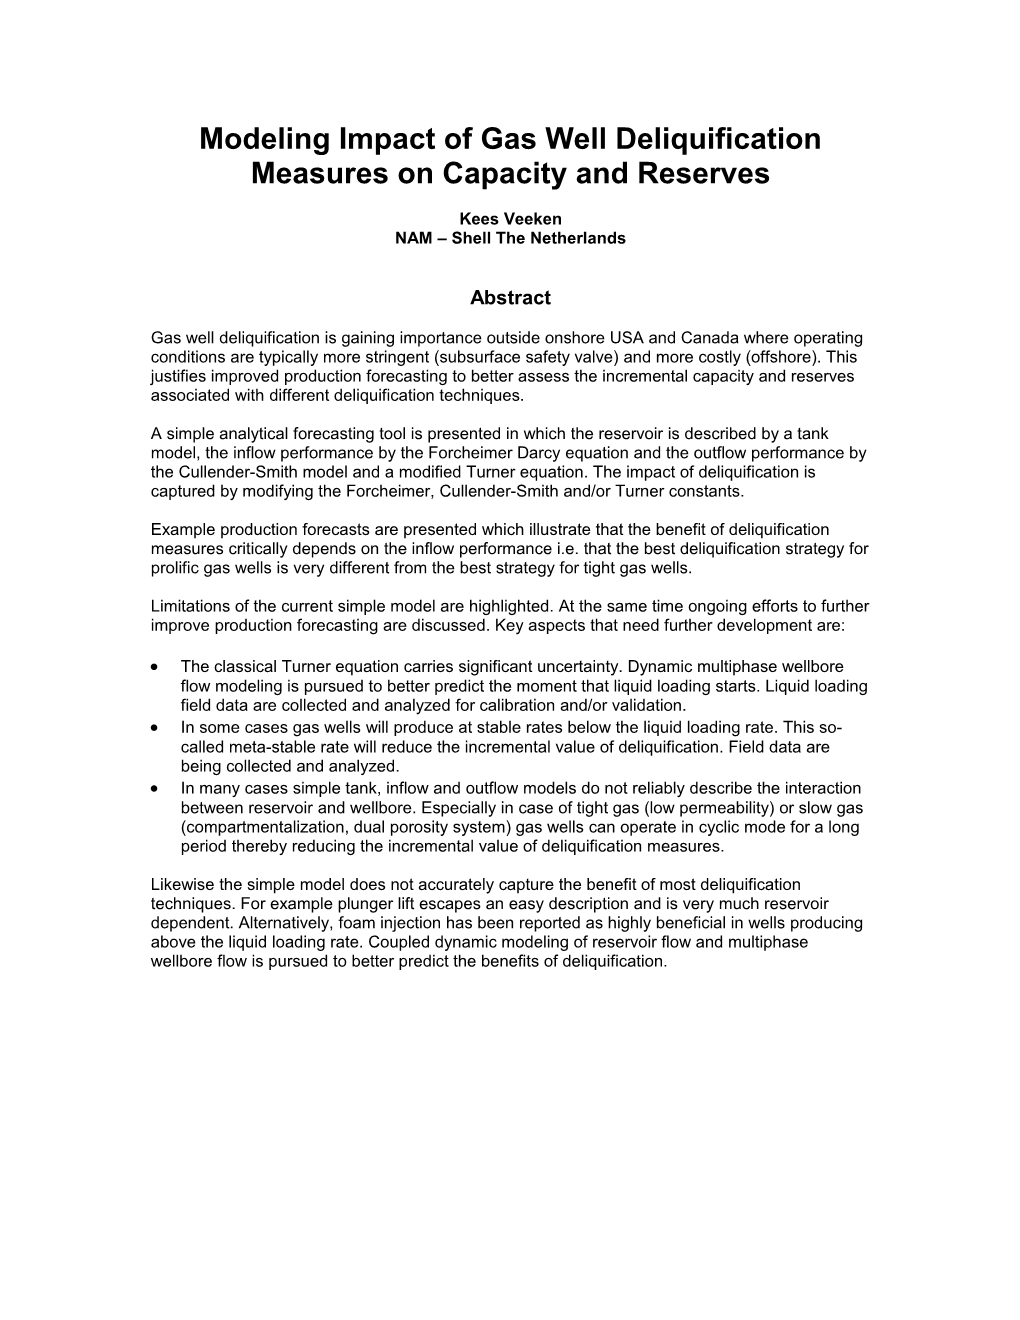 Modeling Impact of Gas Well Deliquification Measures on Capacity and Reserves